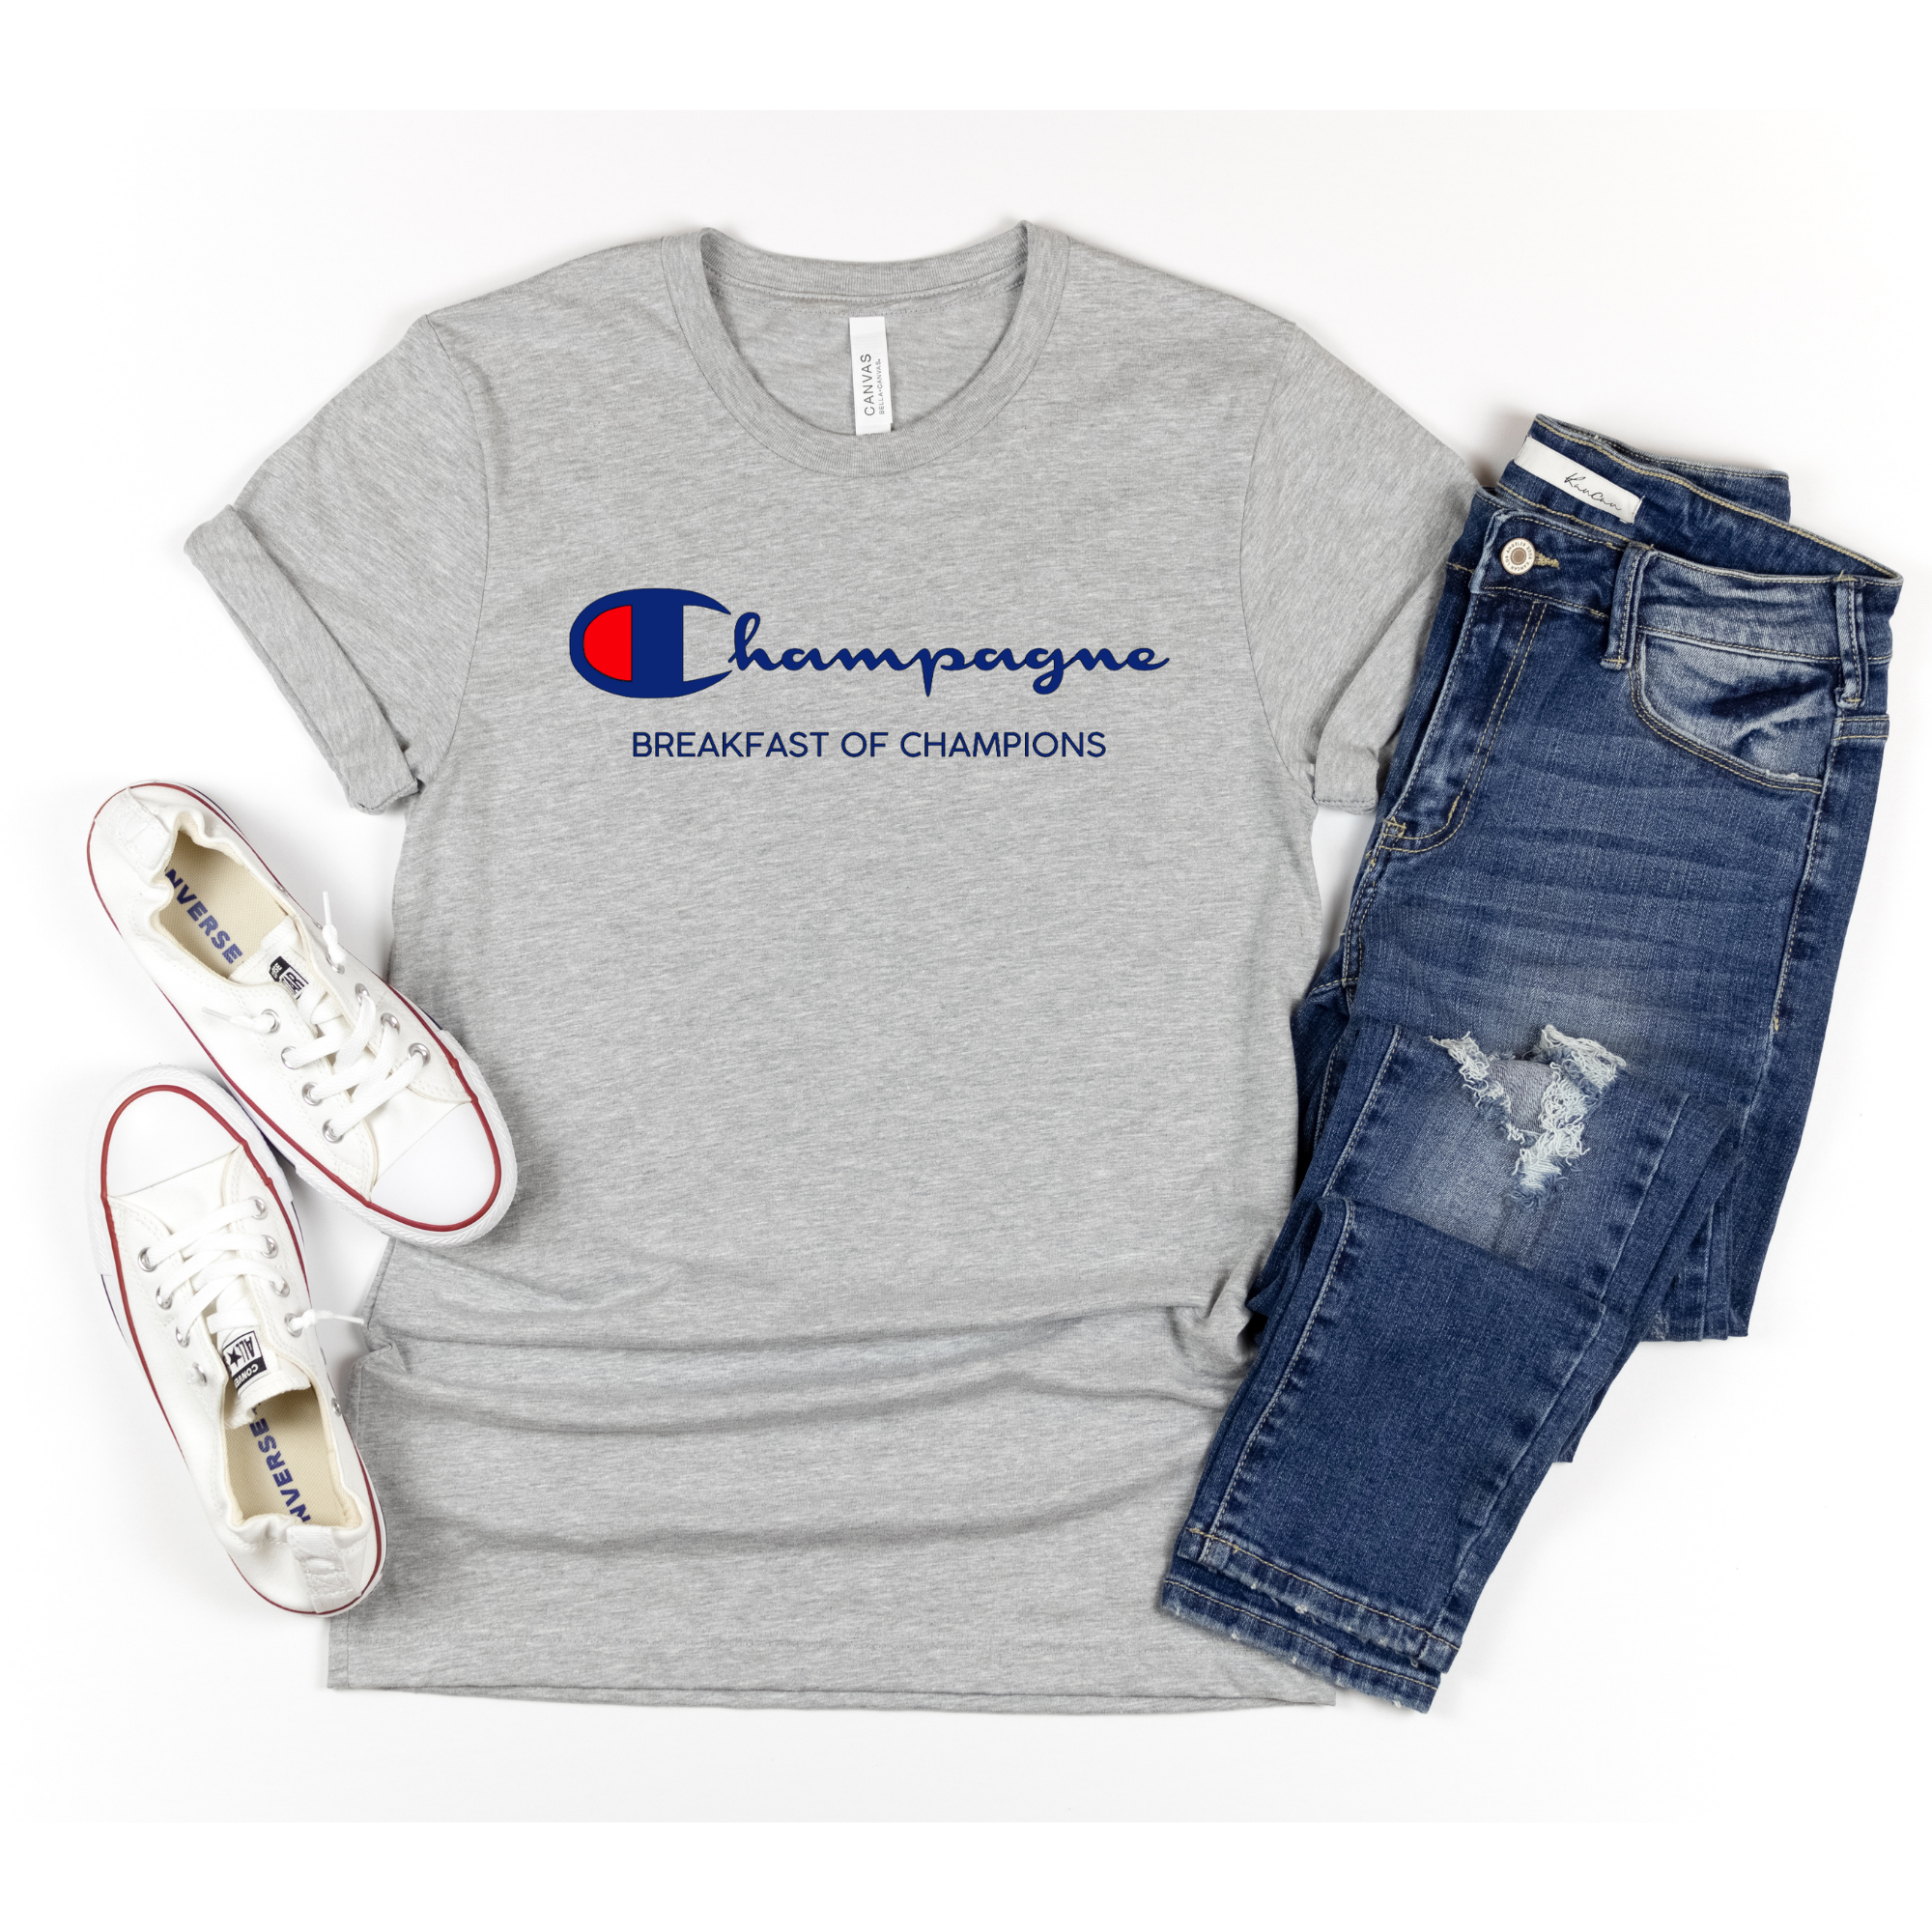 Lulu Grace Designs Champagne Breakfast of Champions Shirt: Funny Apparel for Women Ladies Crew Neck / Small